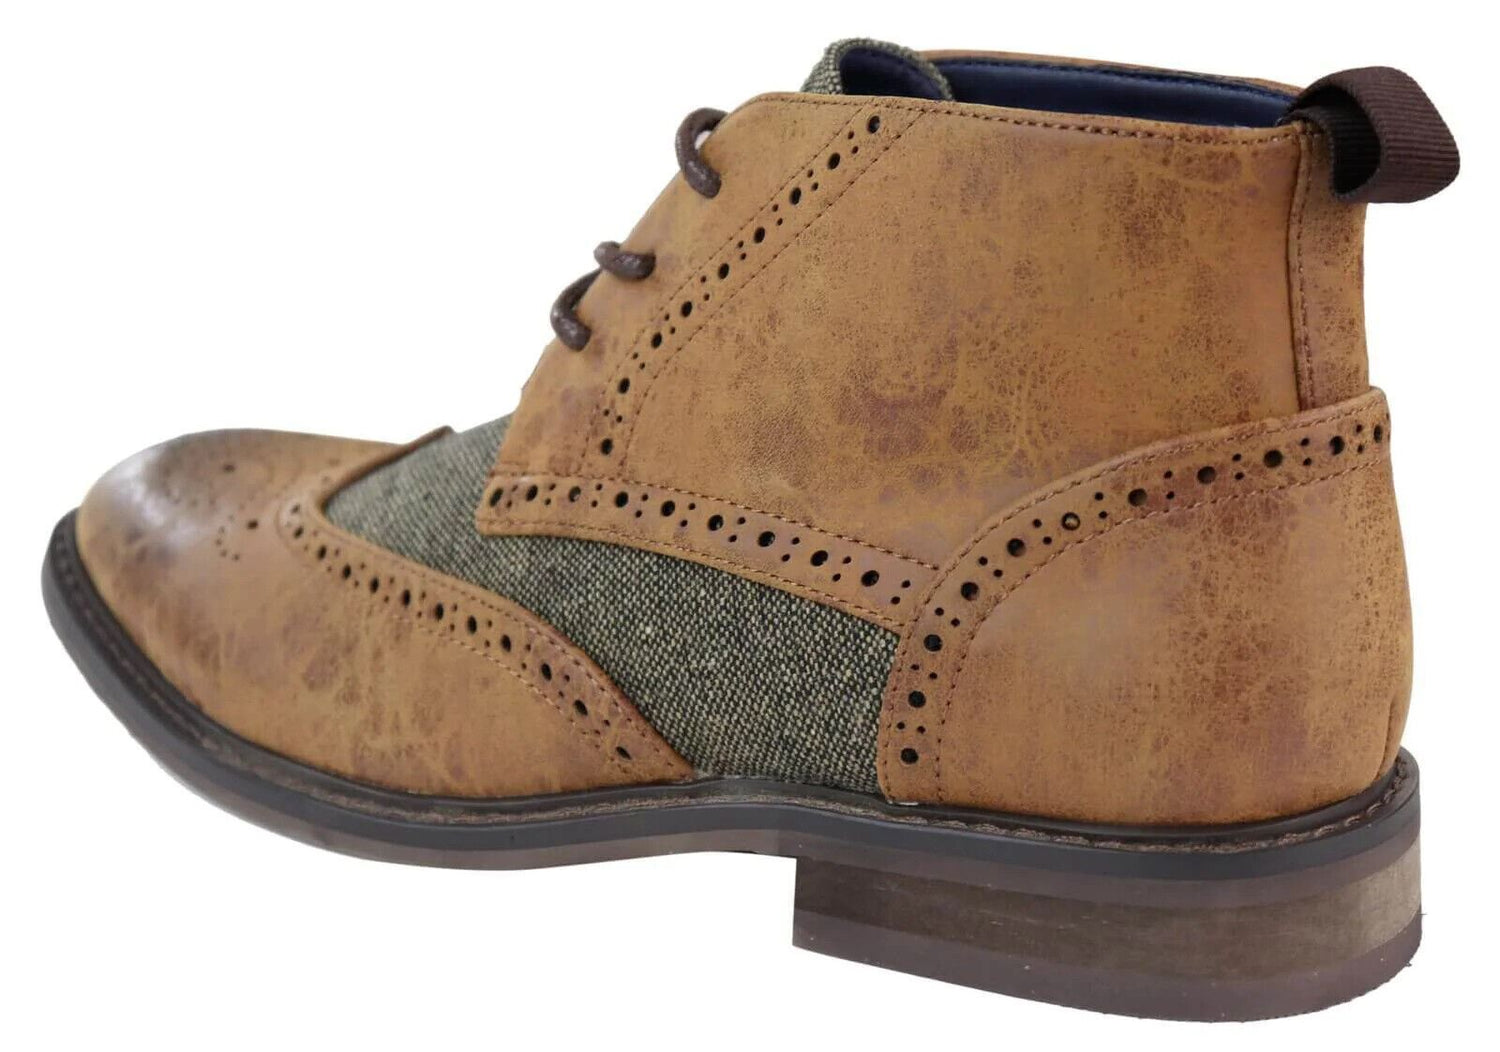 Mens Classic Tweed Oxford Brogue Ankle Boots in Tan Leather